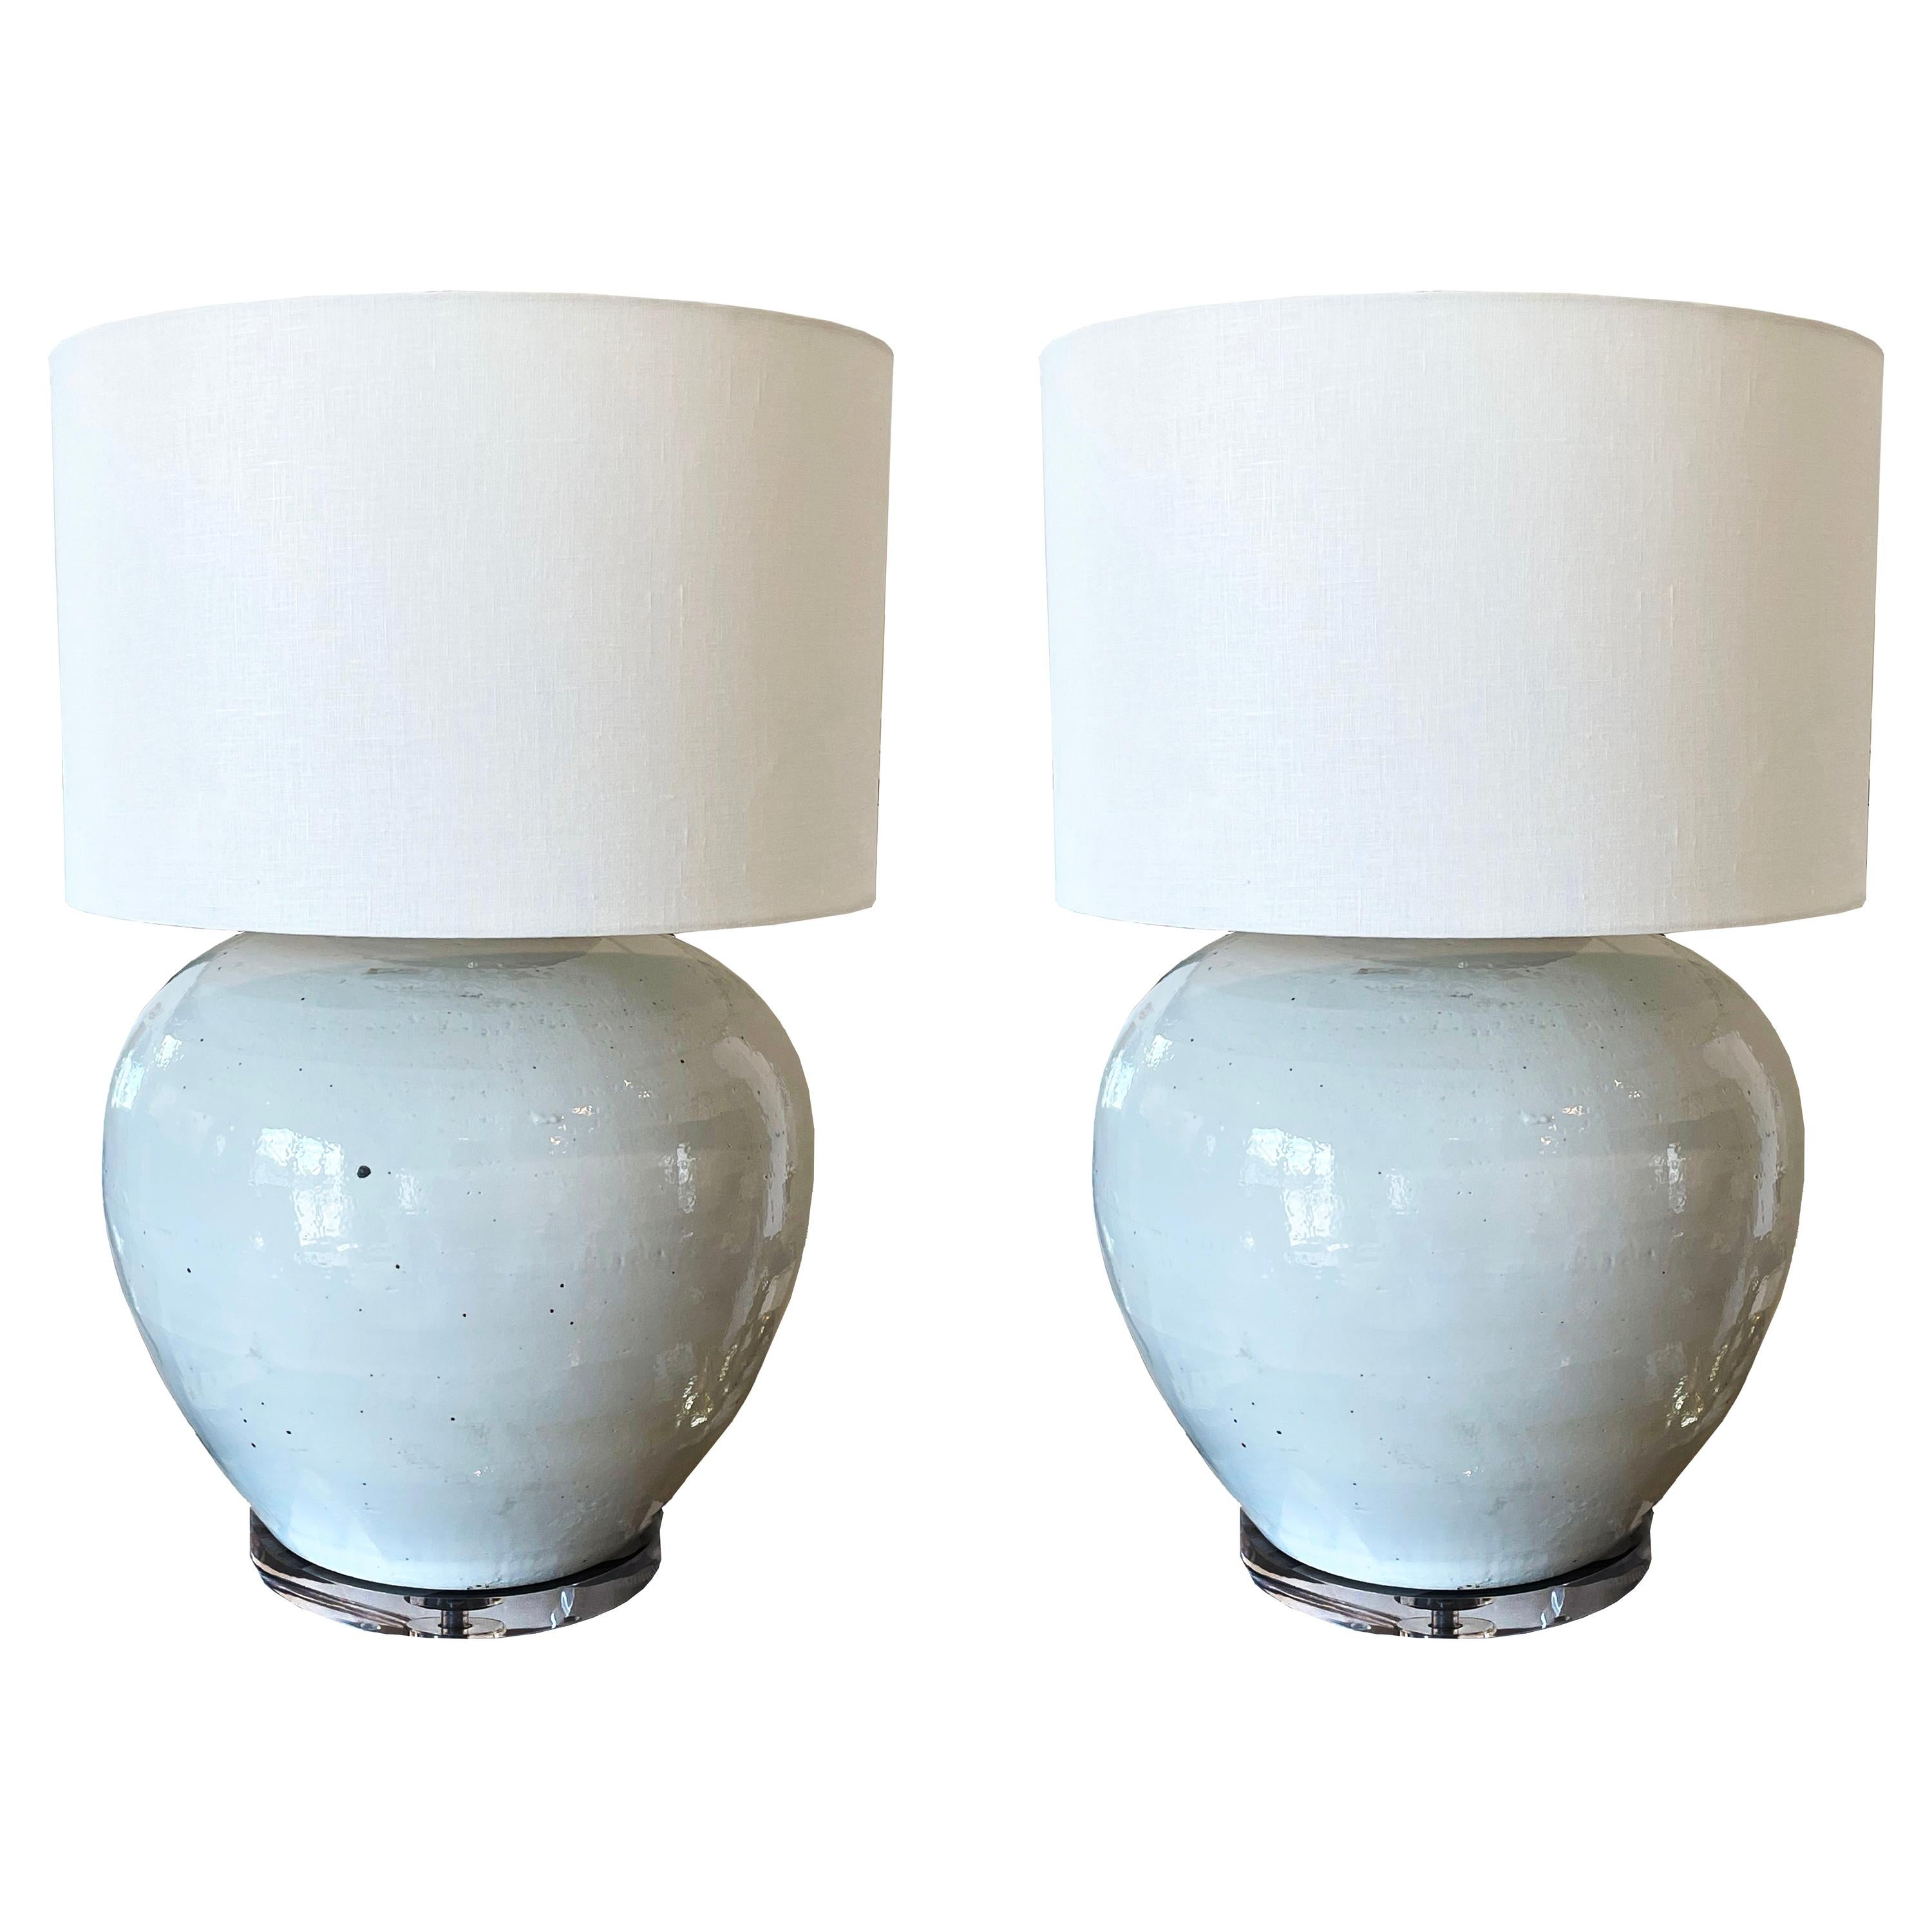 Pair of Large White Glazed Pottery Lamps